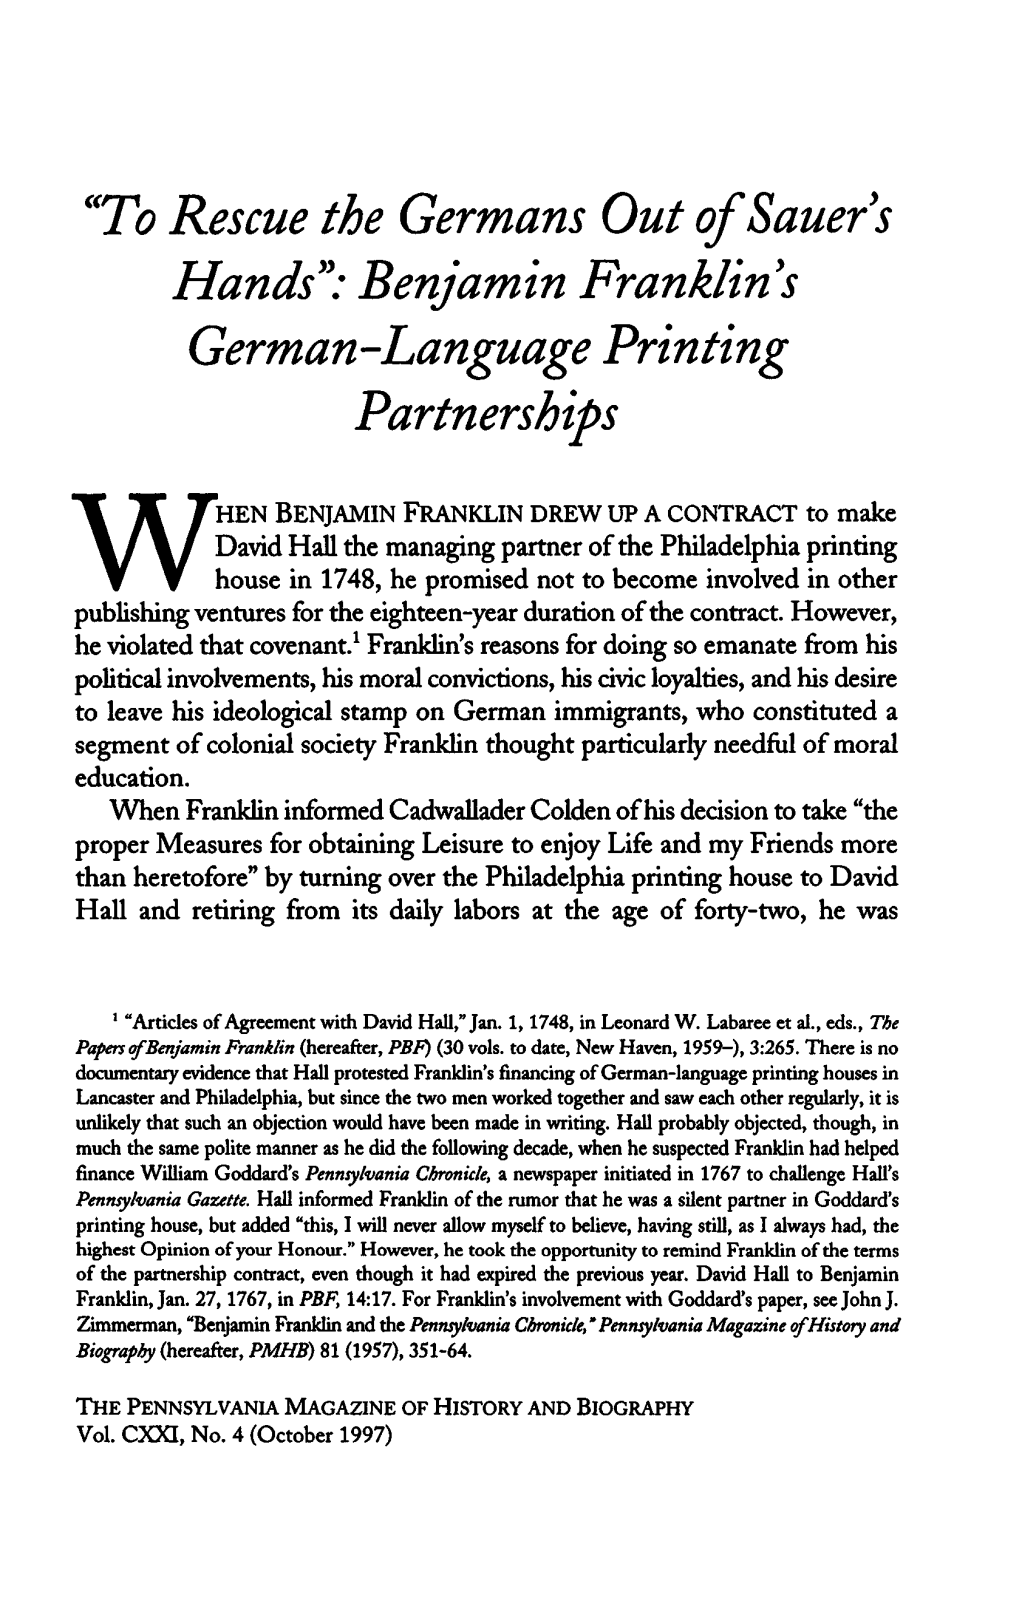 "To Rescue the Germans out Ofsauers Hands":Benjamin Franklins German-Language Printing Partnerships